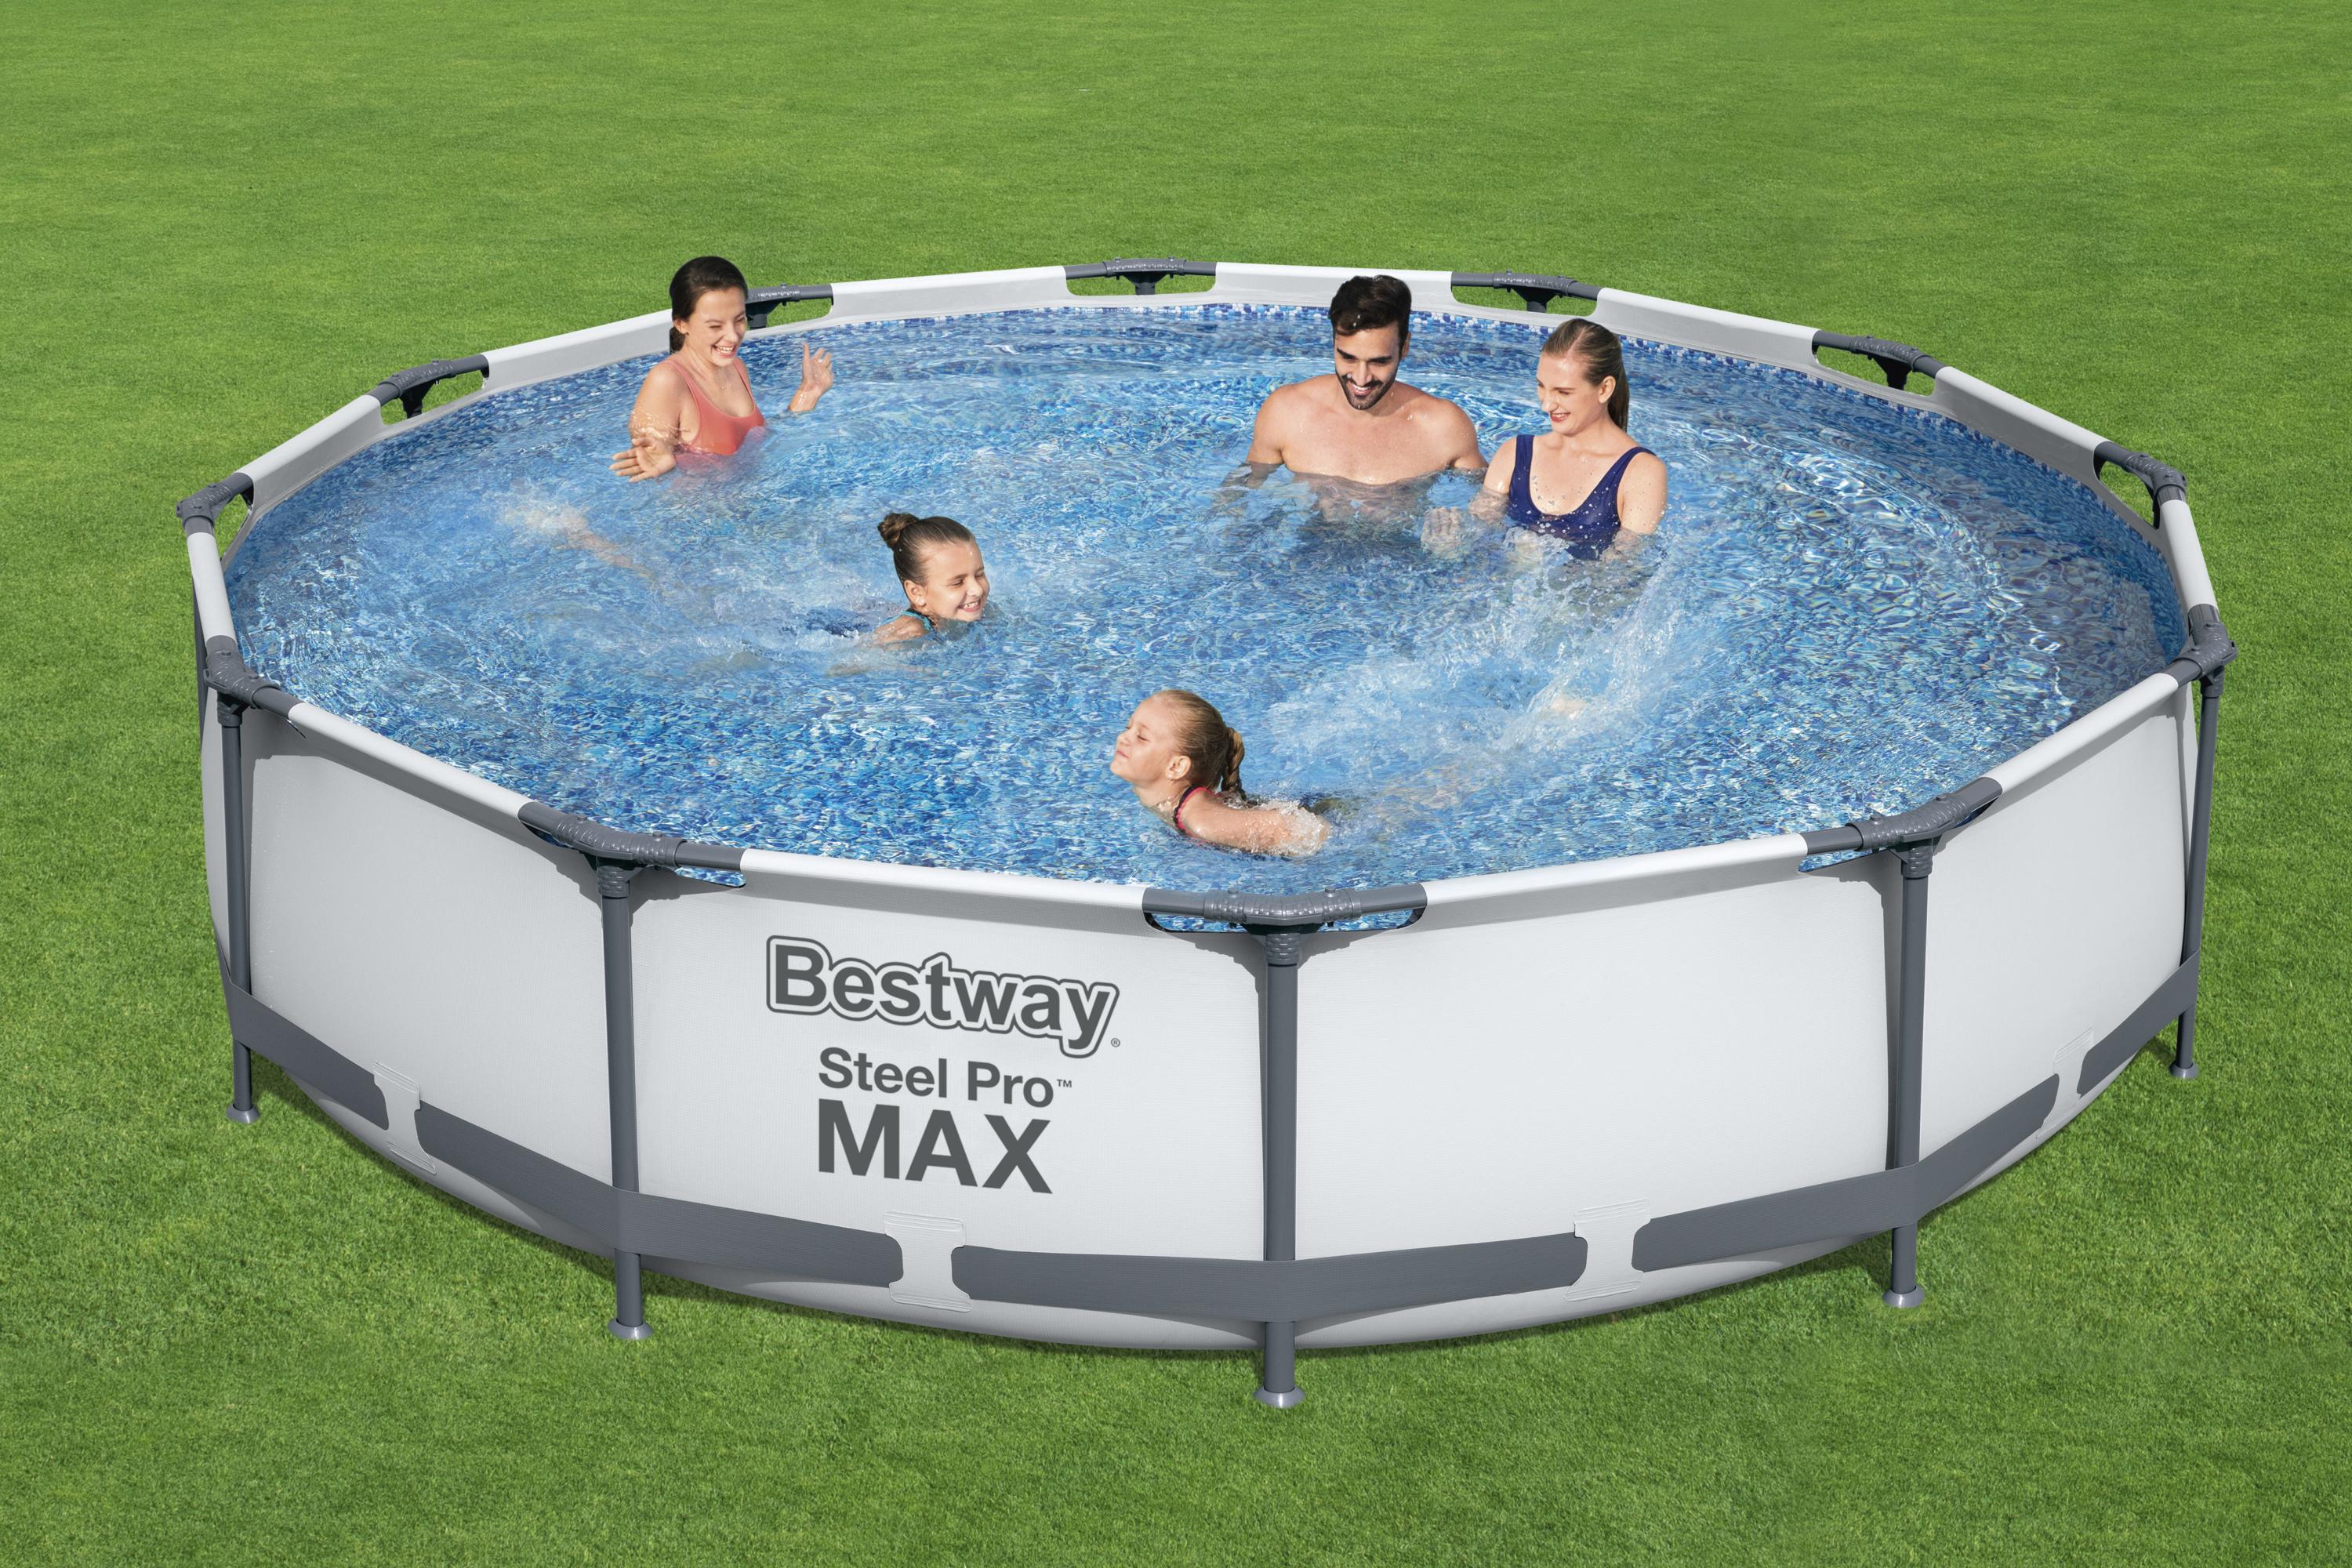 Bestway Steel Pro Max Swimming Pool Set with 330 GPH Filter Pump, 12' x 30" - image 2 of 9